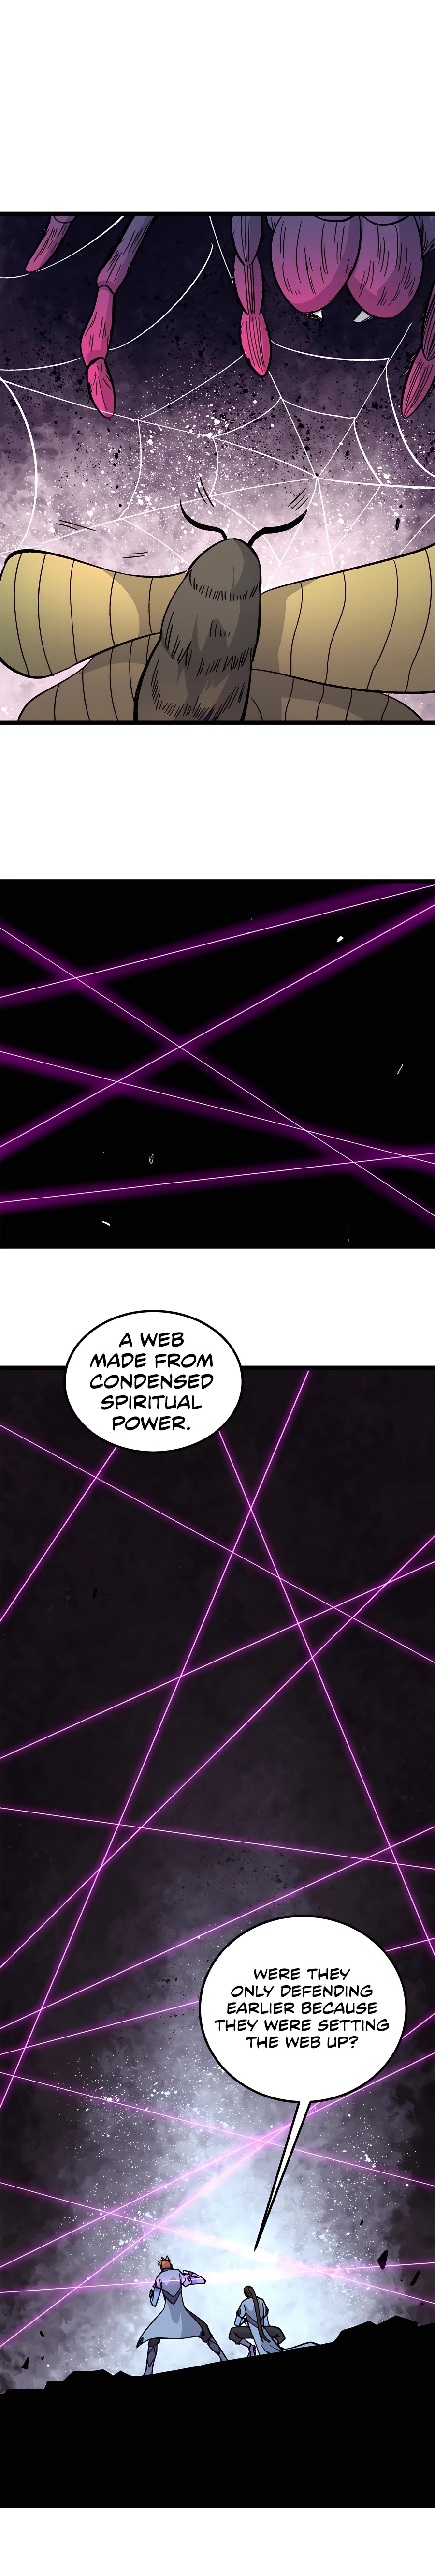 All Hail The Sect Leader - Page 3